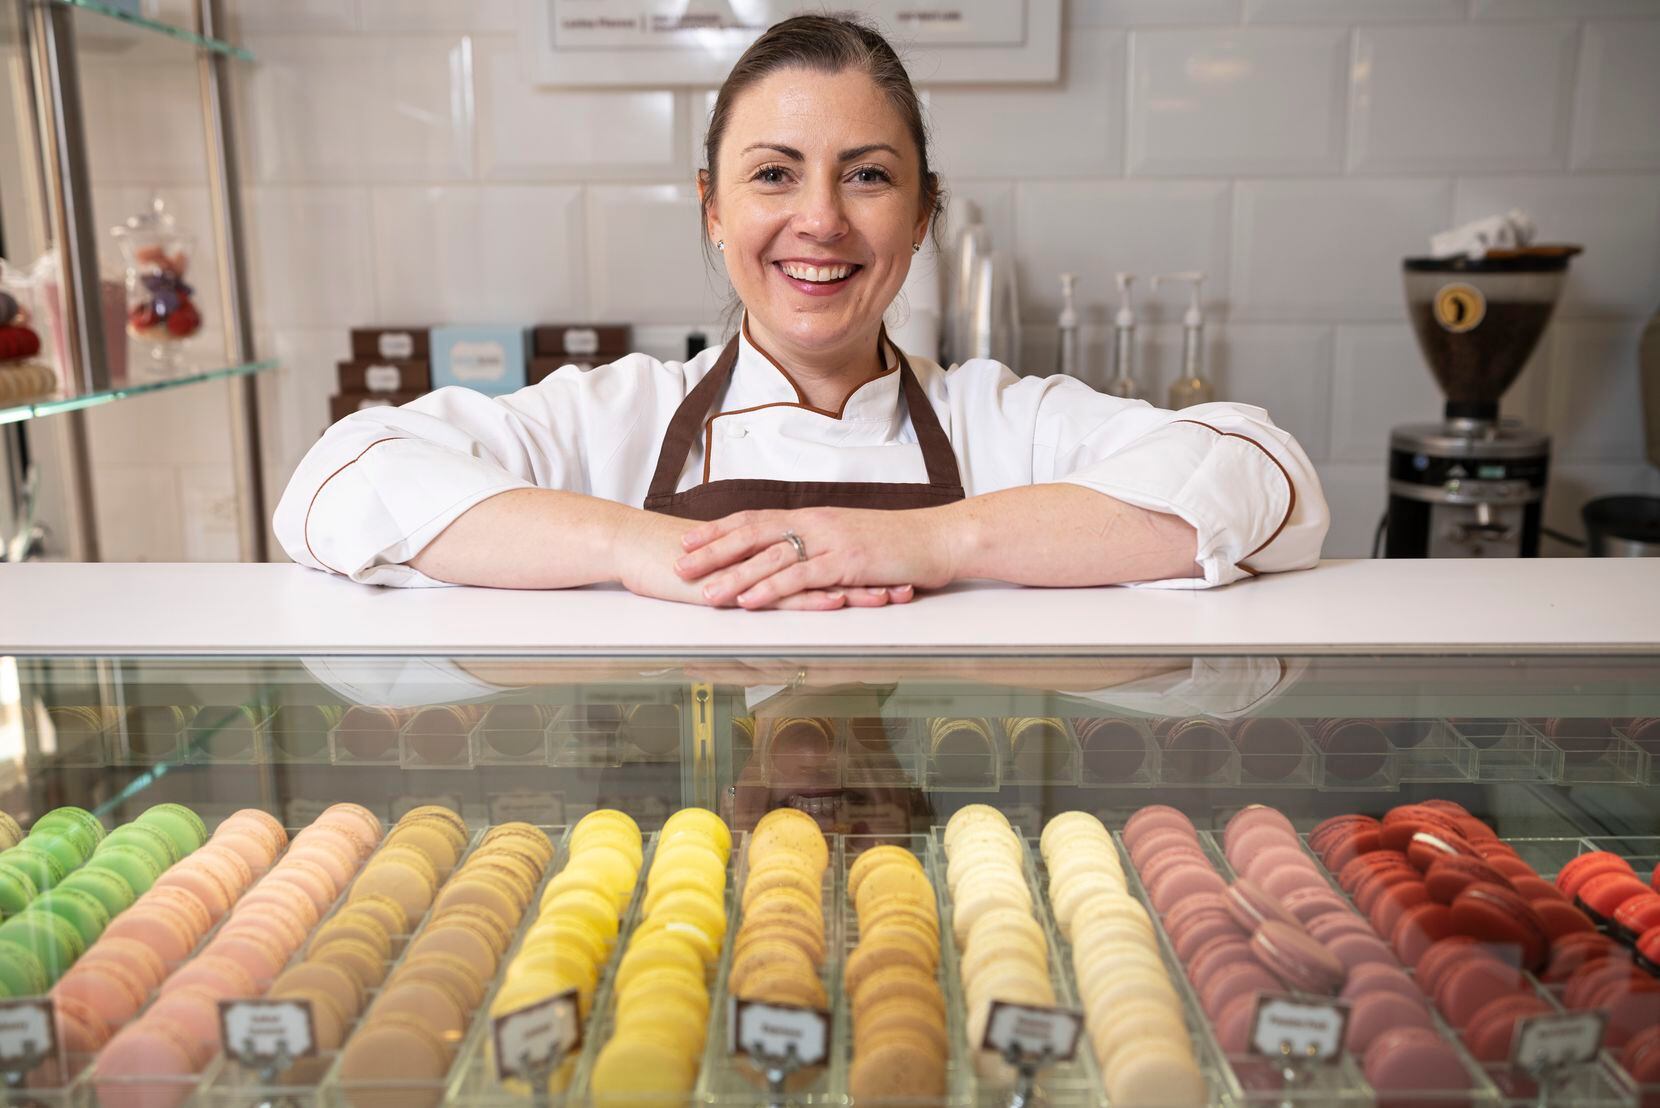 Andrea Meyer is the owner of Bisous Bisous Patisserie in Dallas.